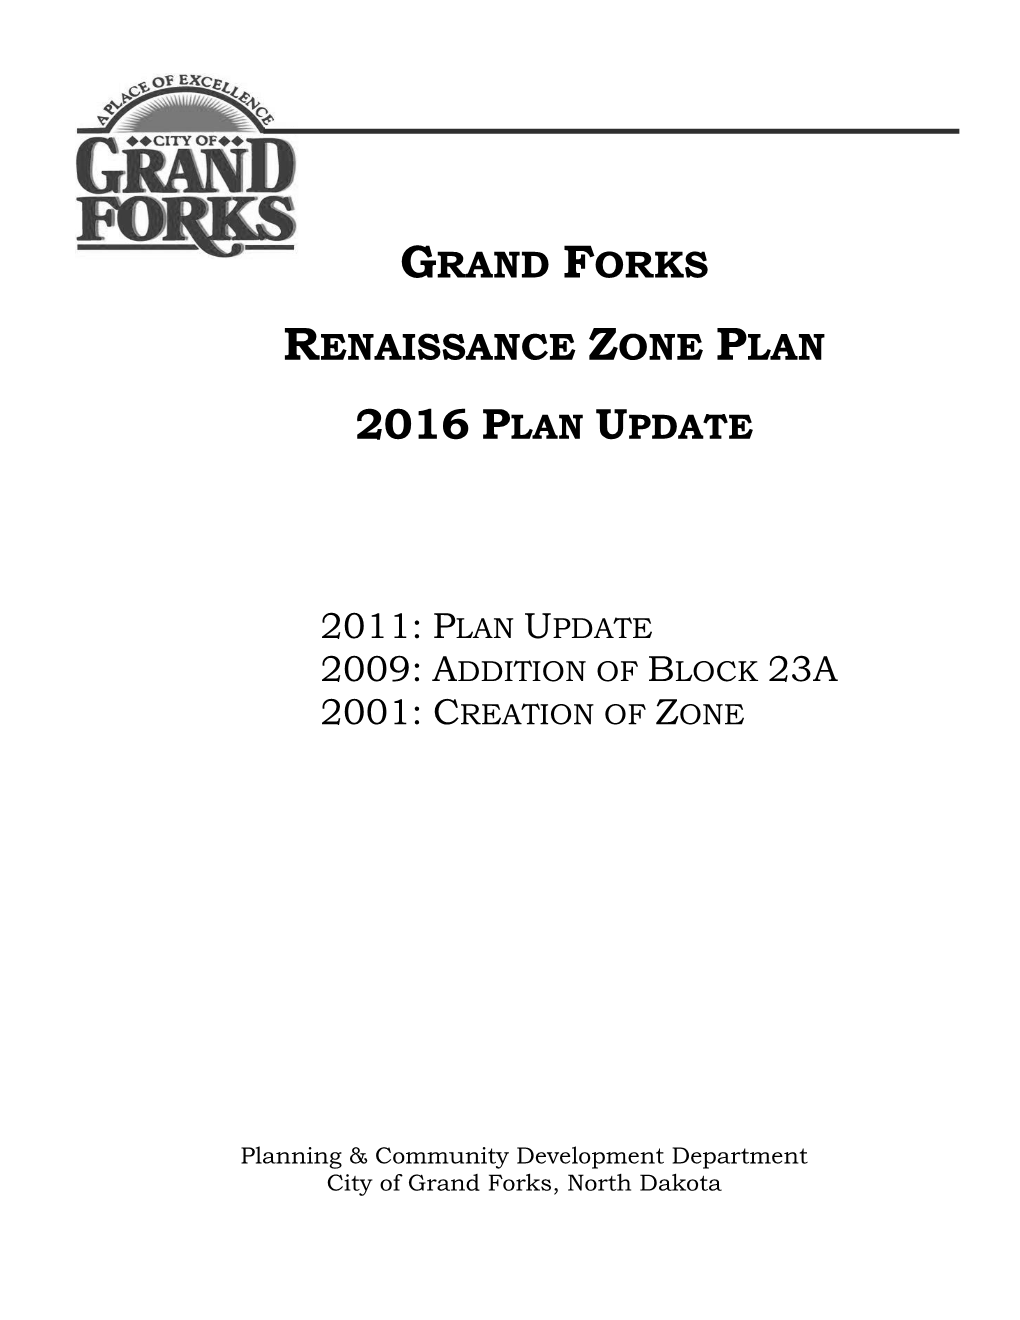 2011: Plan Update 2009: Addition of Block 23A 2001: Creation of Zone